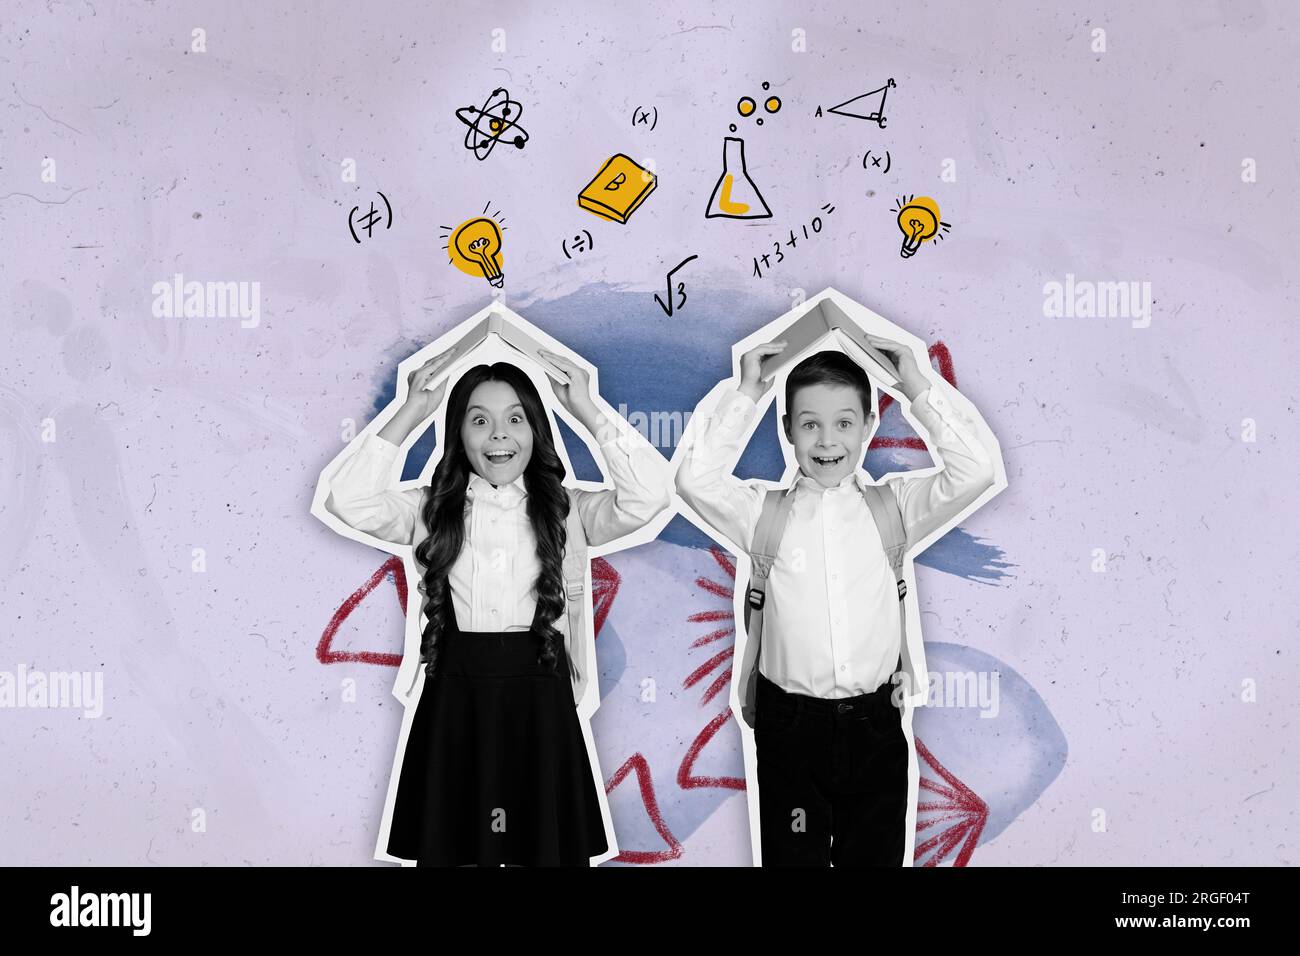 Banner collage sketch of happy positive clever children genius great idea hold book above head isolated on drawing retro background Stock Photo